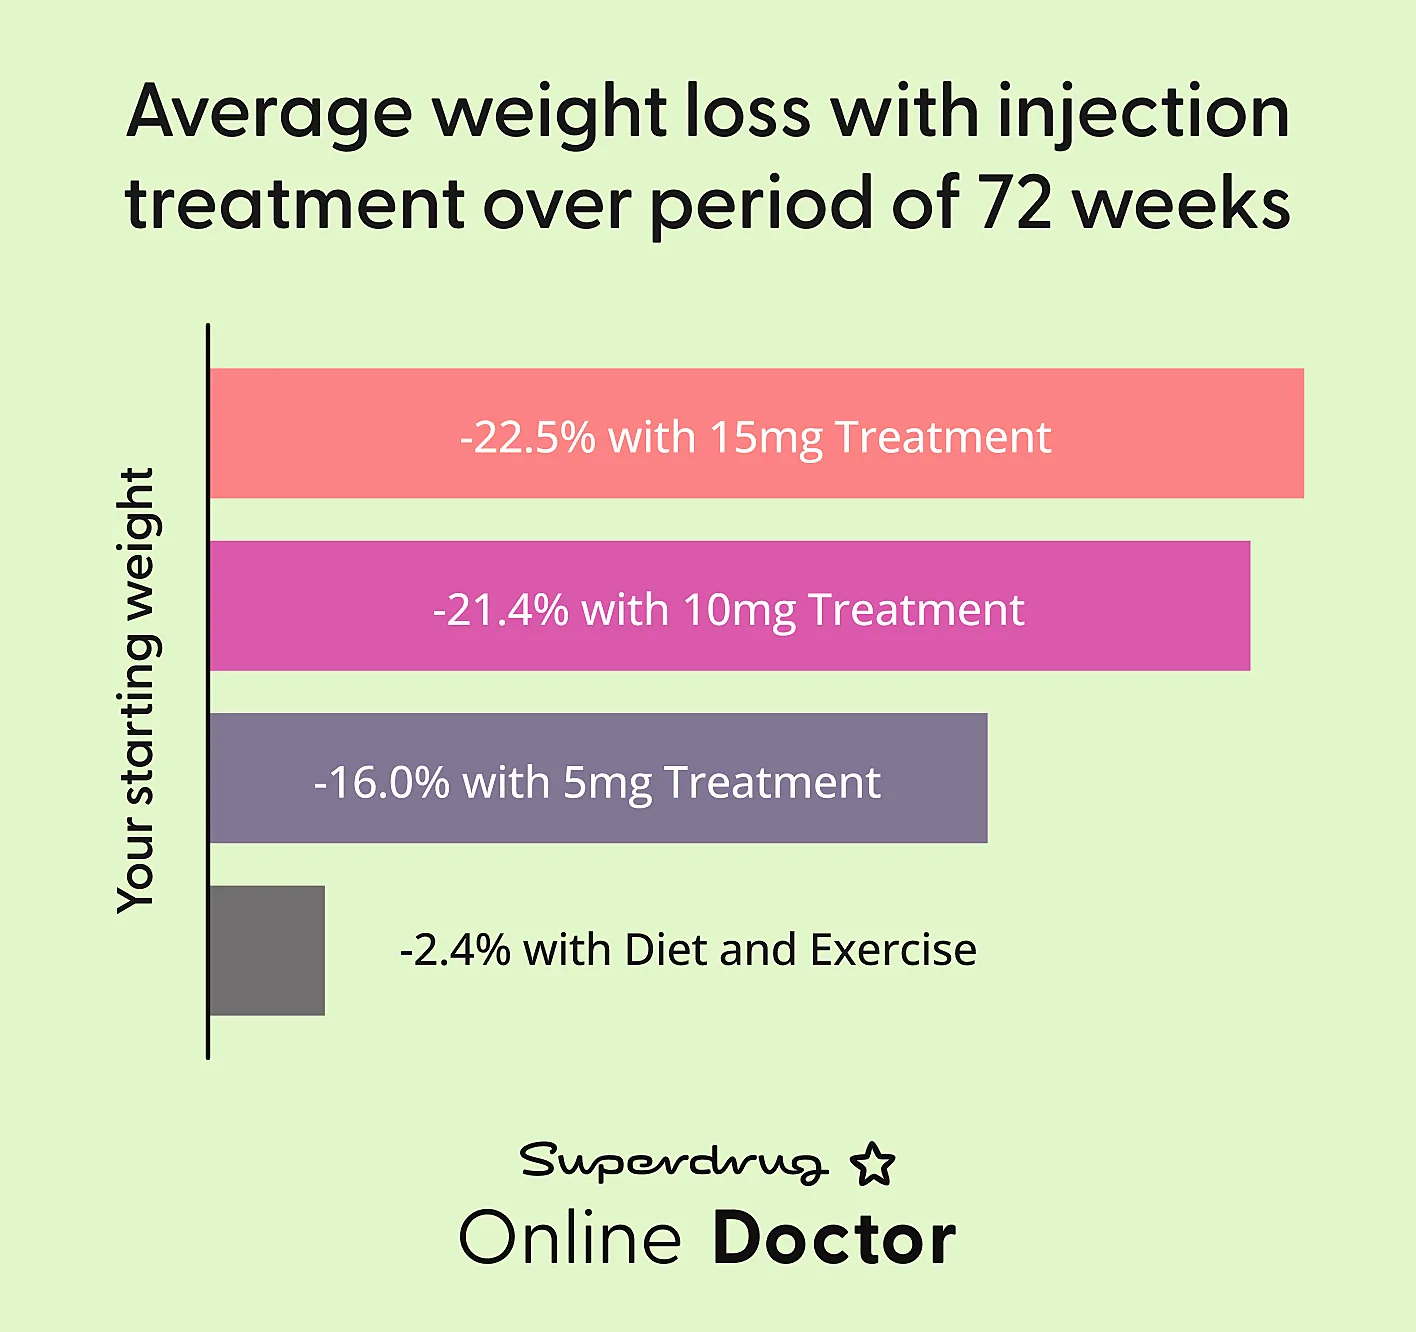 bar chart showing the average weight loss with Mounjaro over a period of 72 weeks on 15mg, 10mg, 5mg, and without treatment